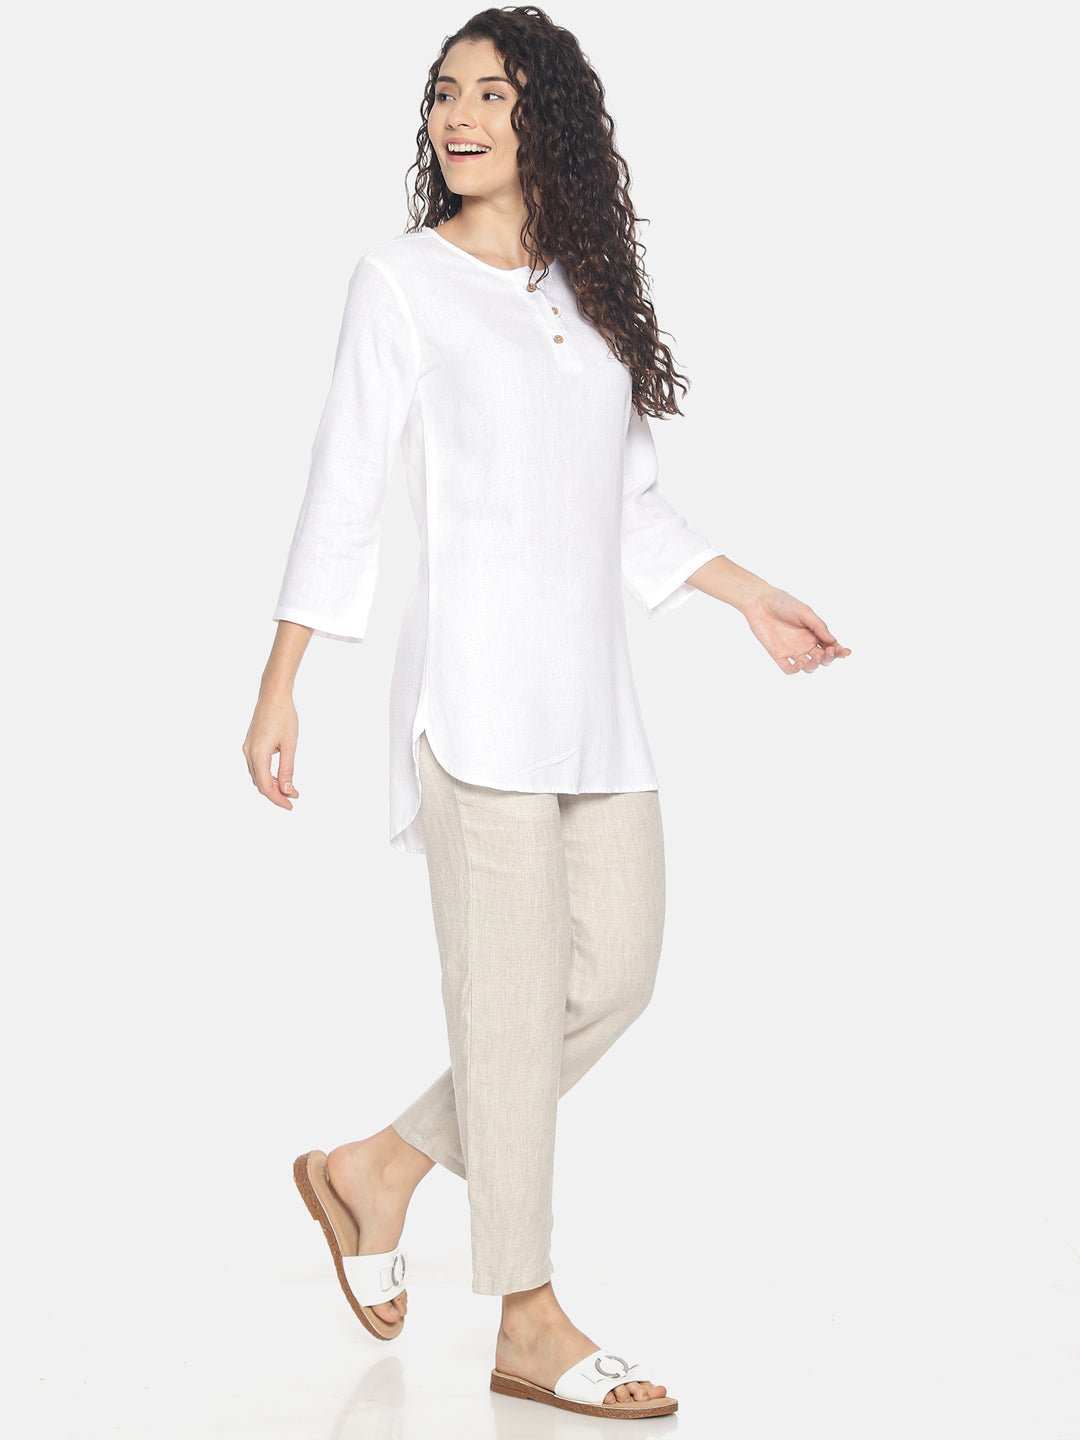 Ecentric Women's White and Beige Colour High Low Lounge Wear Set - CBD Store India